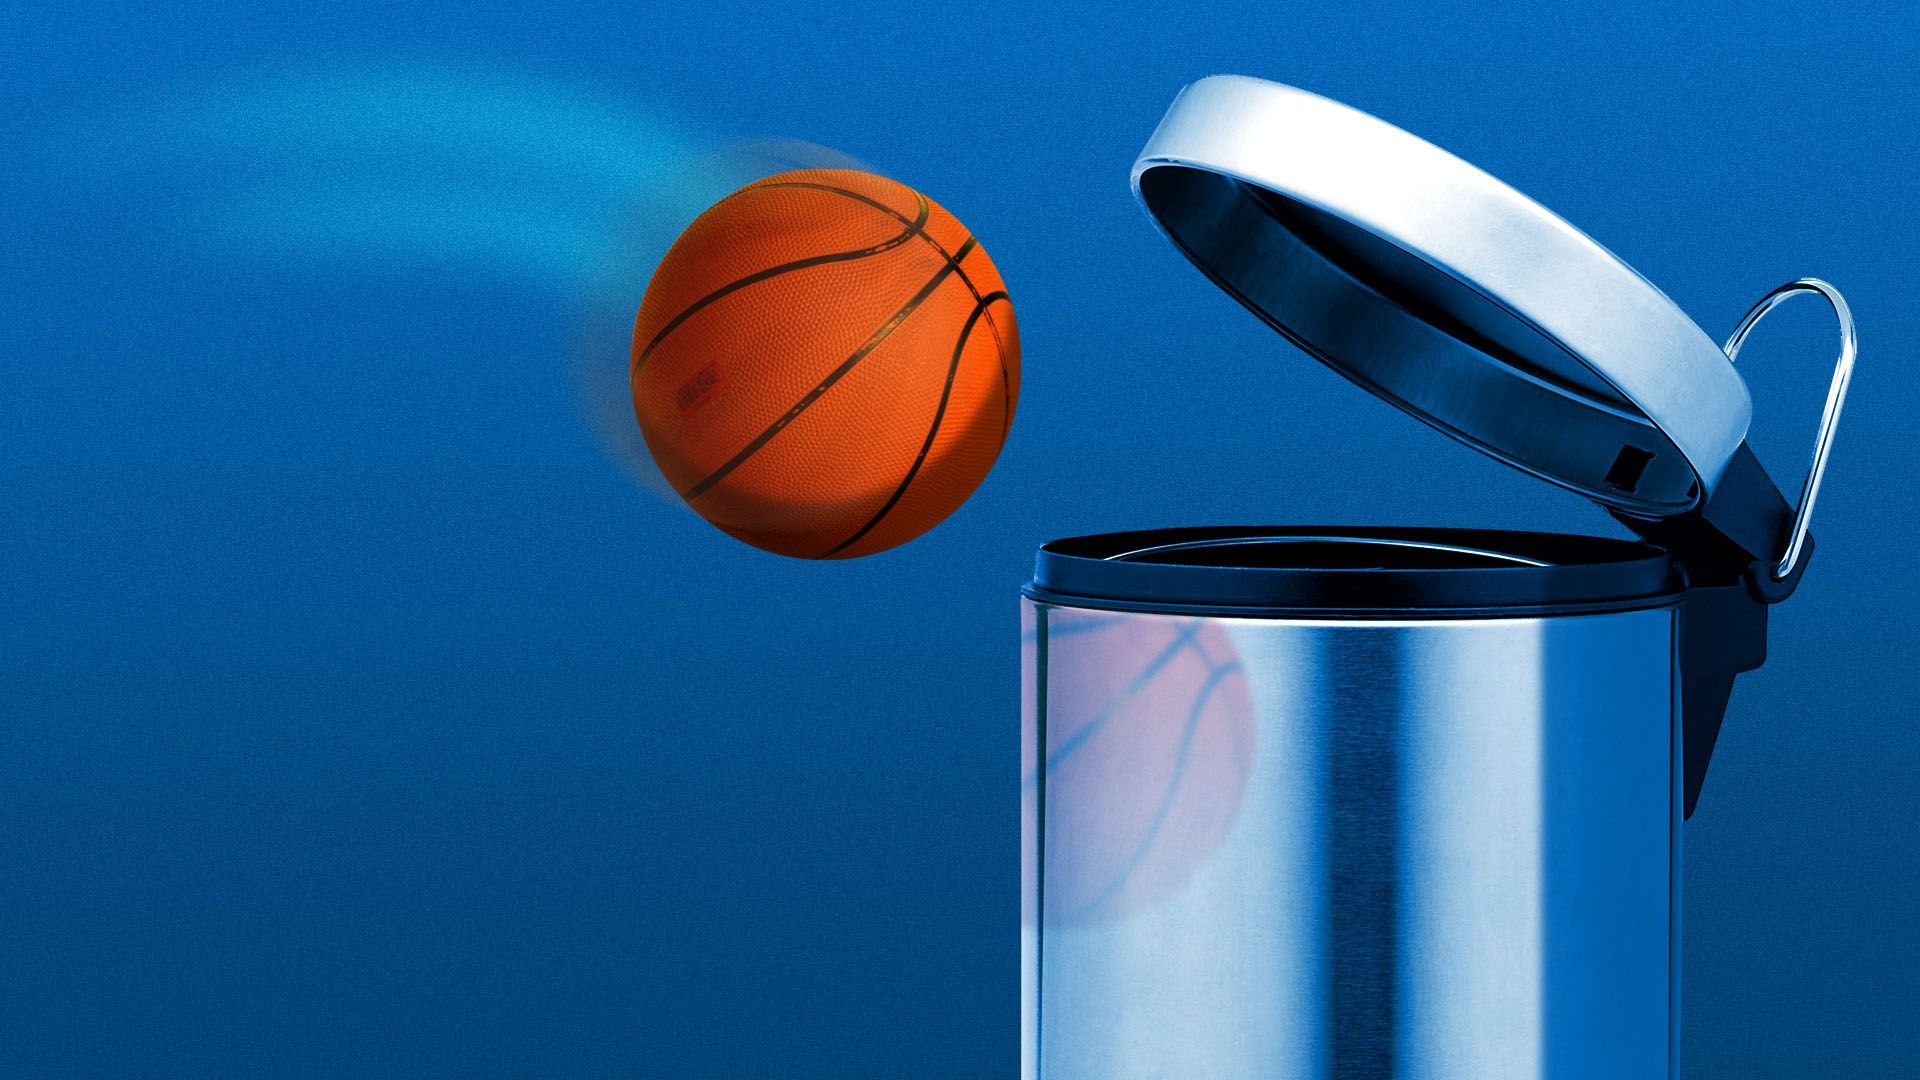 Illustration of a basketball being thrown into a garbage can